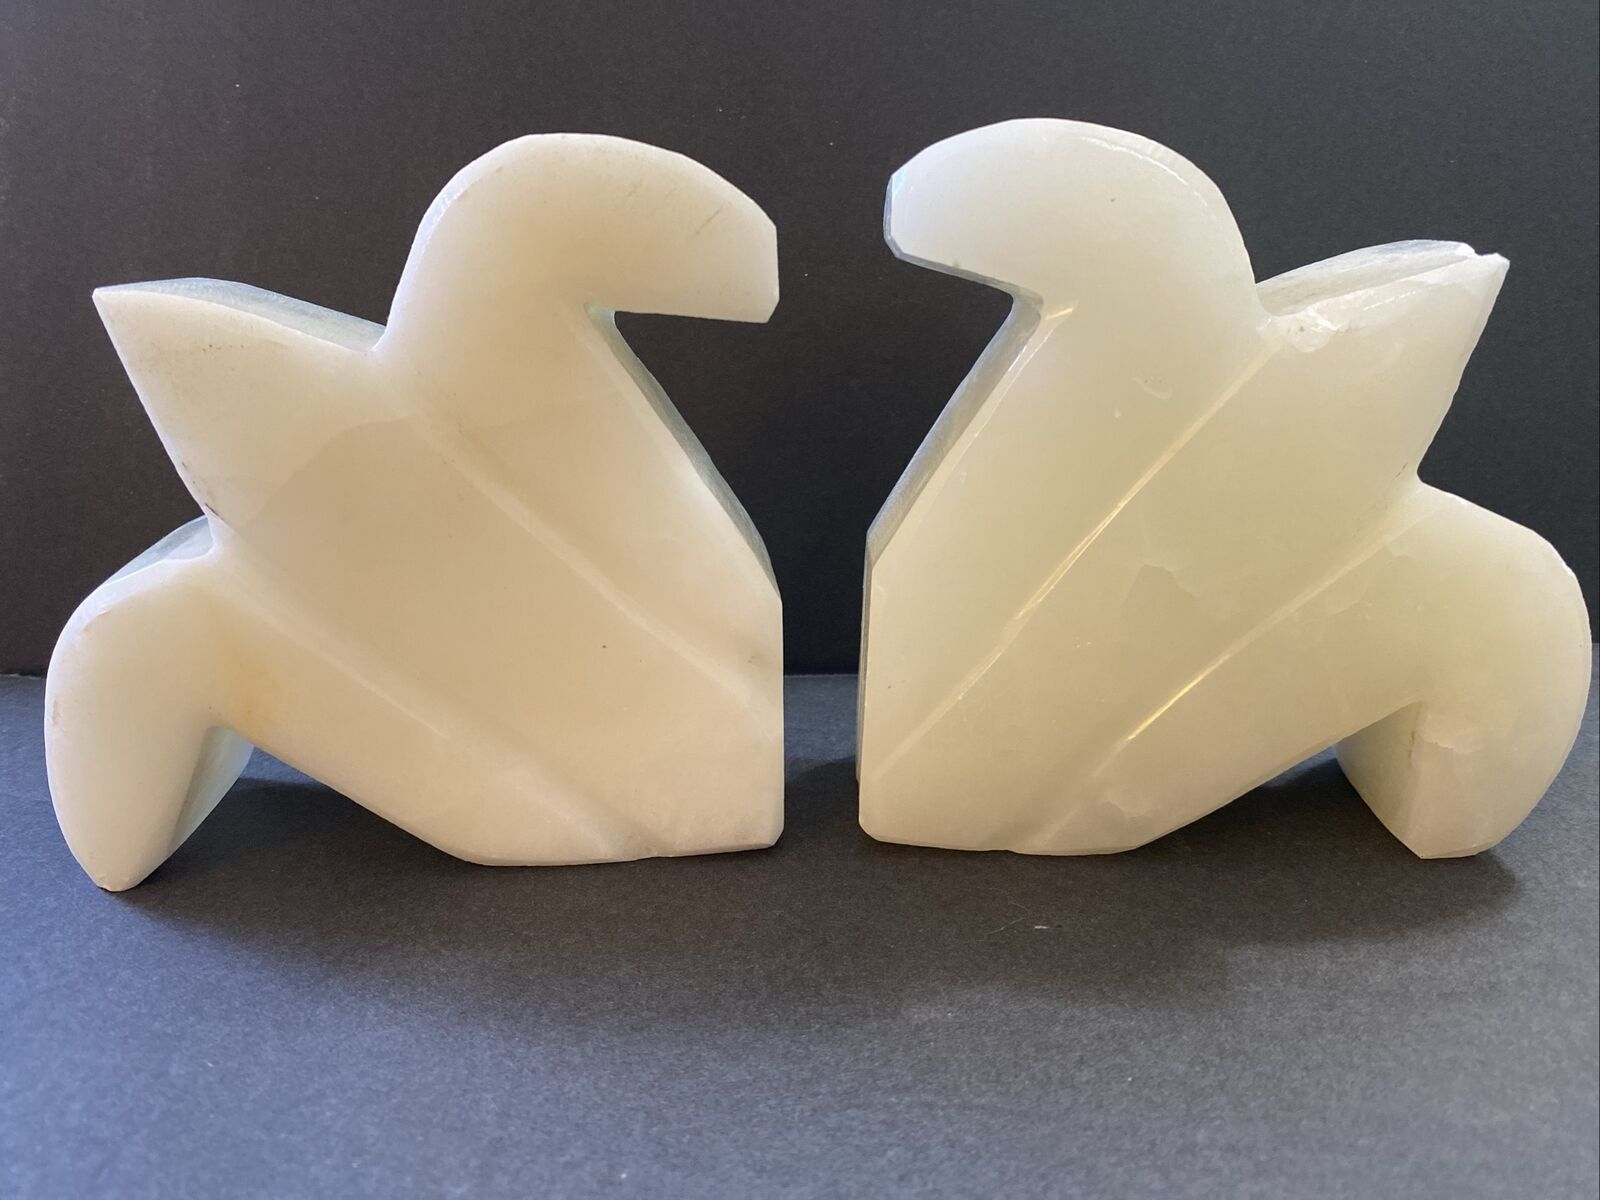 VTG Carved Polished White Stone Bookends MCM Home Decor